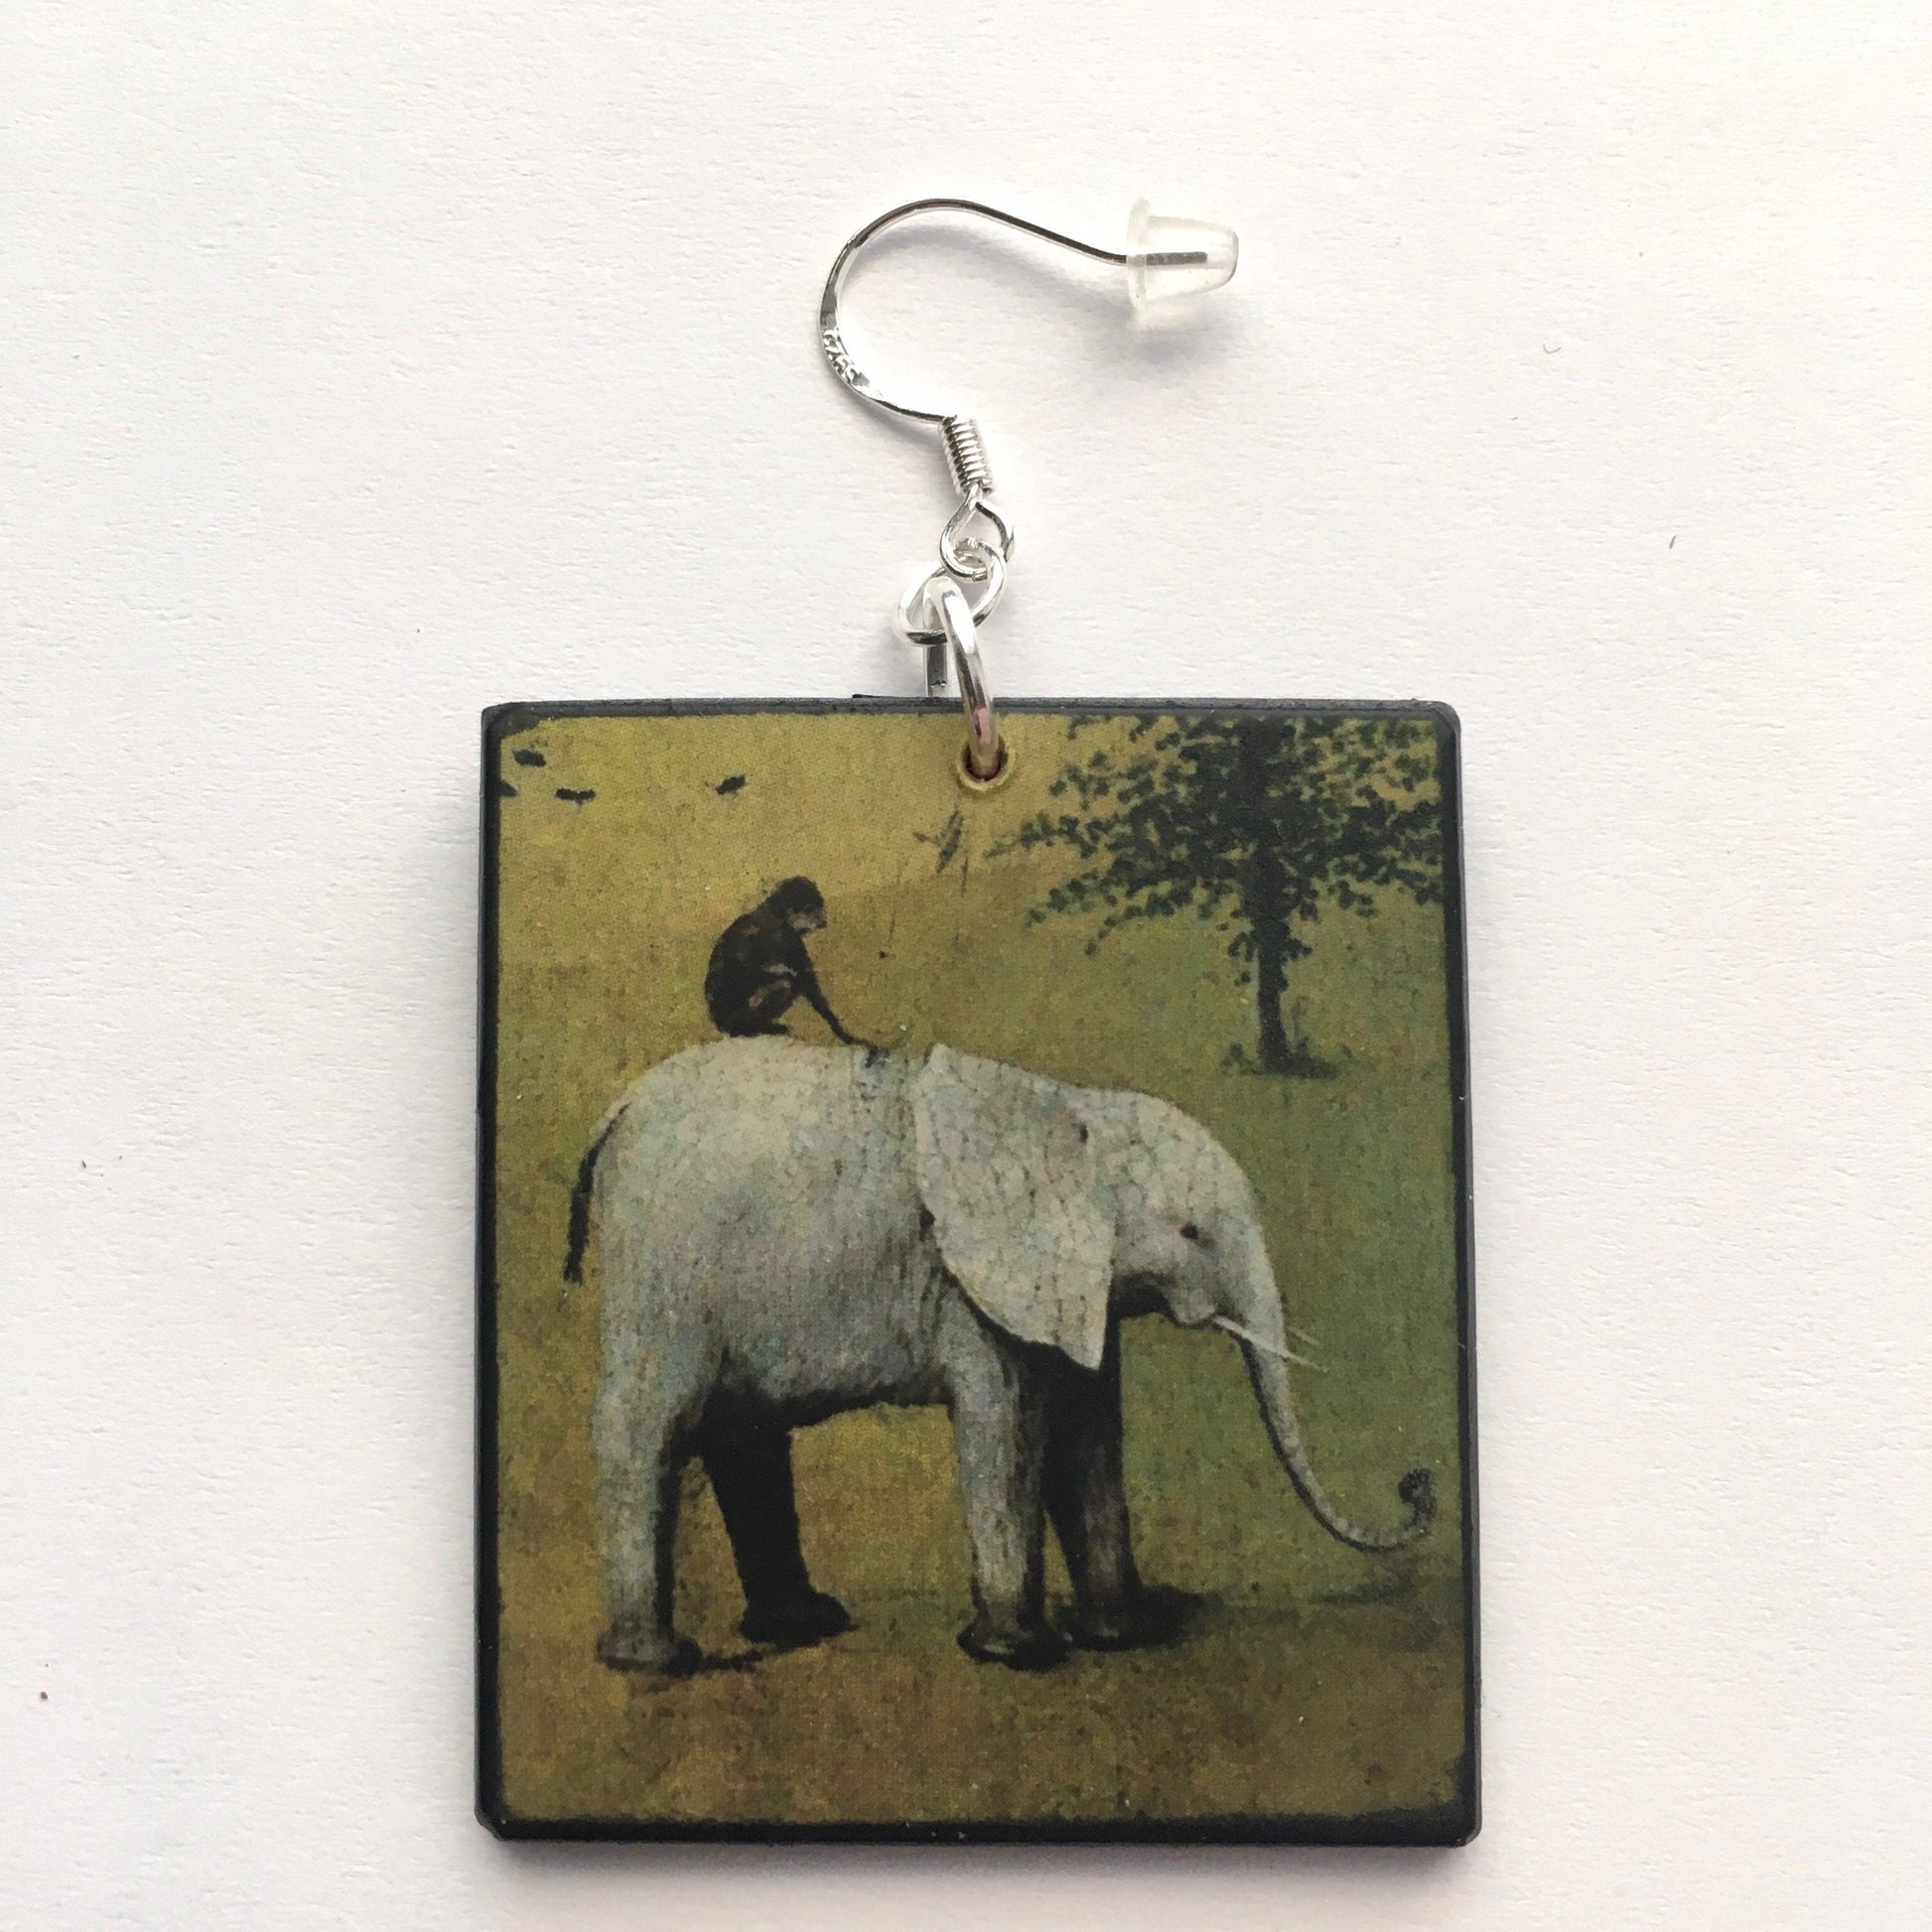  Earrings inspired by Hieronymus Bosch elephant art details from his famous triptych painting “The Garden of Earthly Delights” on sustainable wood and sterling silver hypoallergenic hooks.